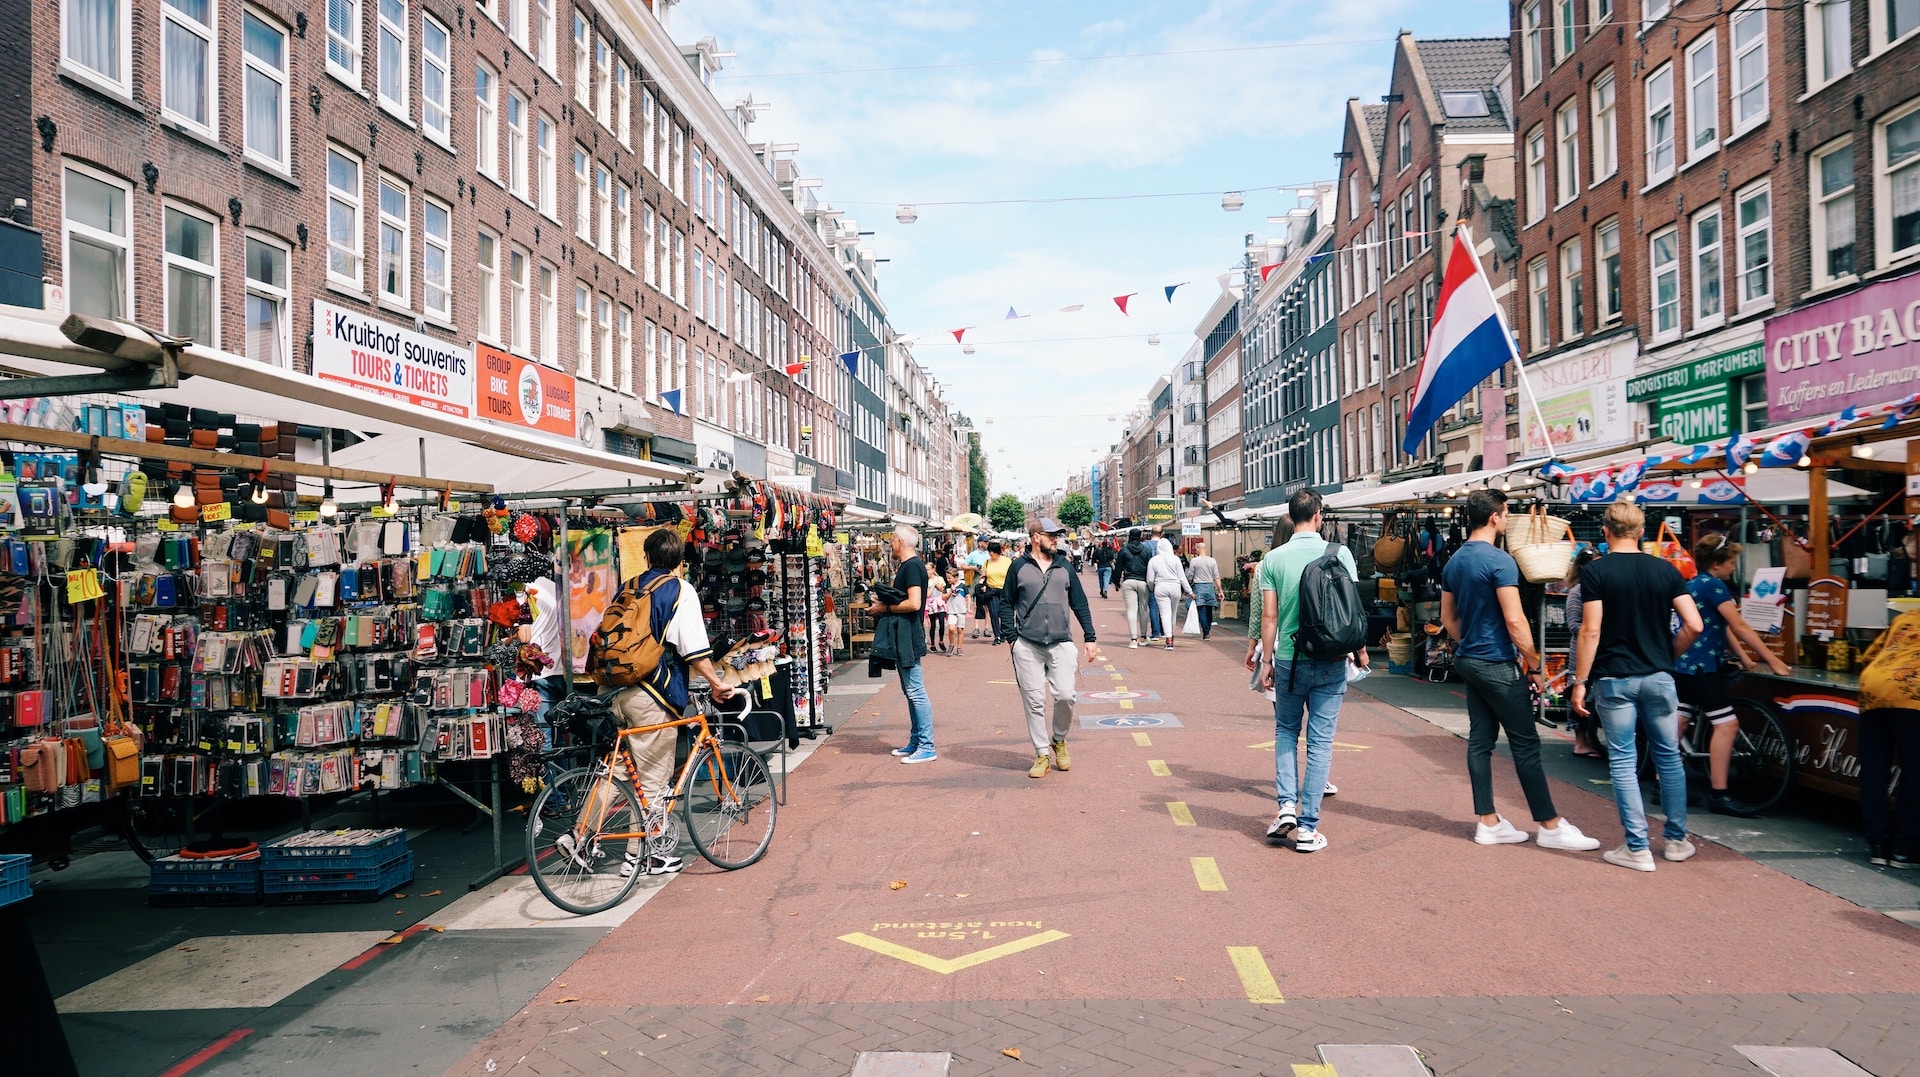 A festival in the street in Amsterdam.